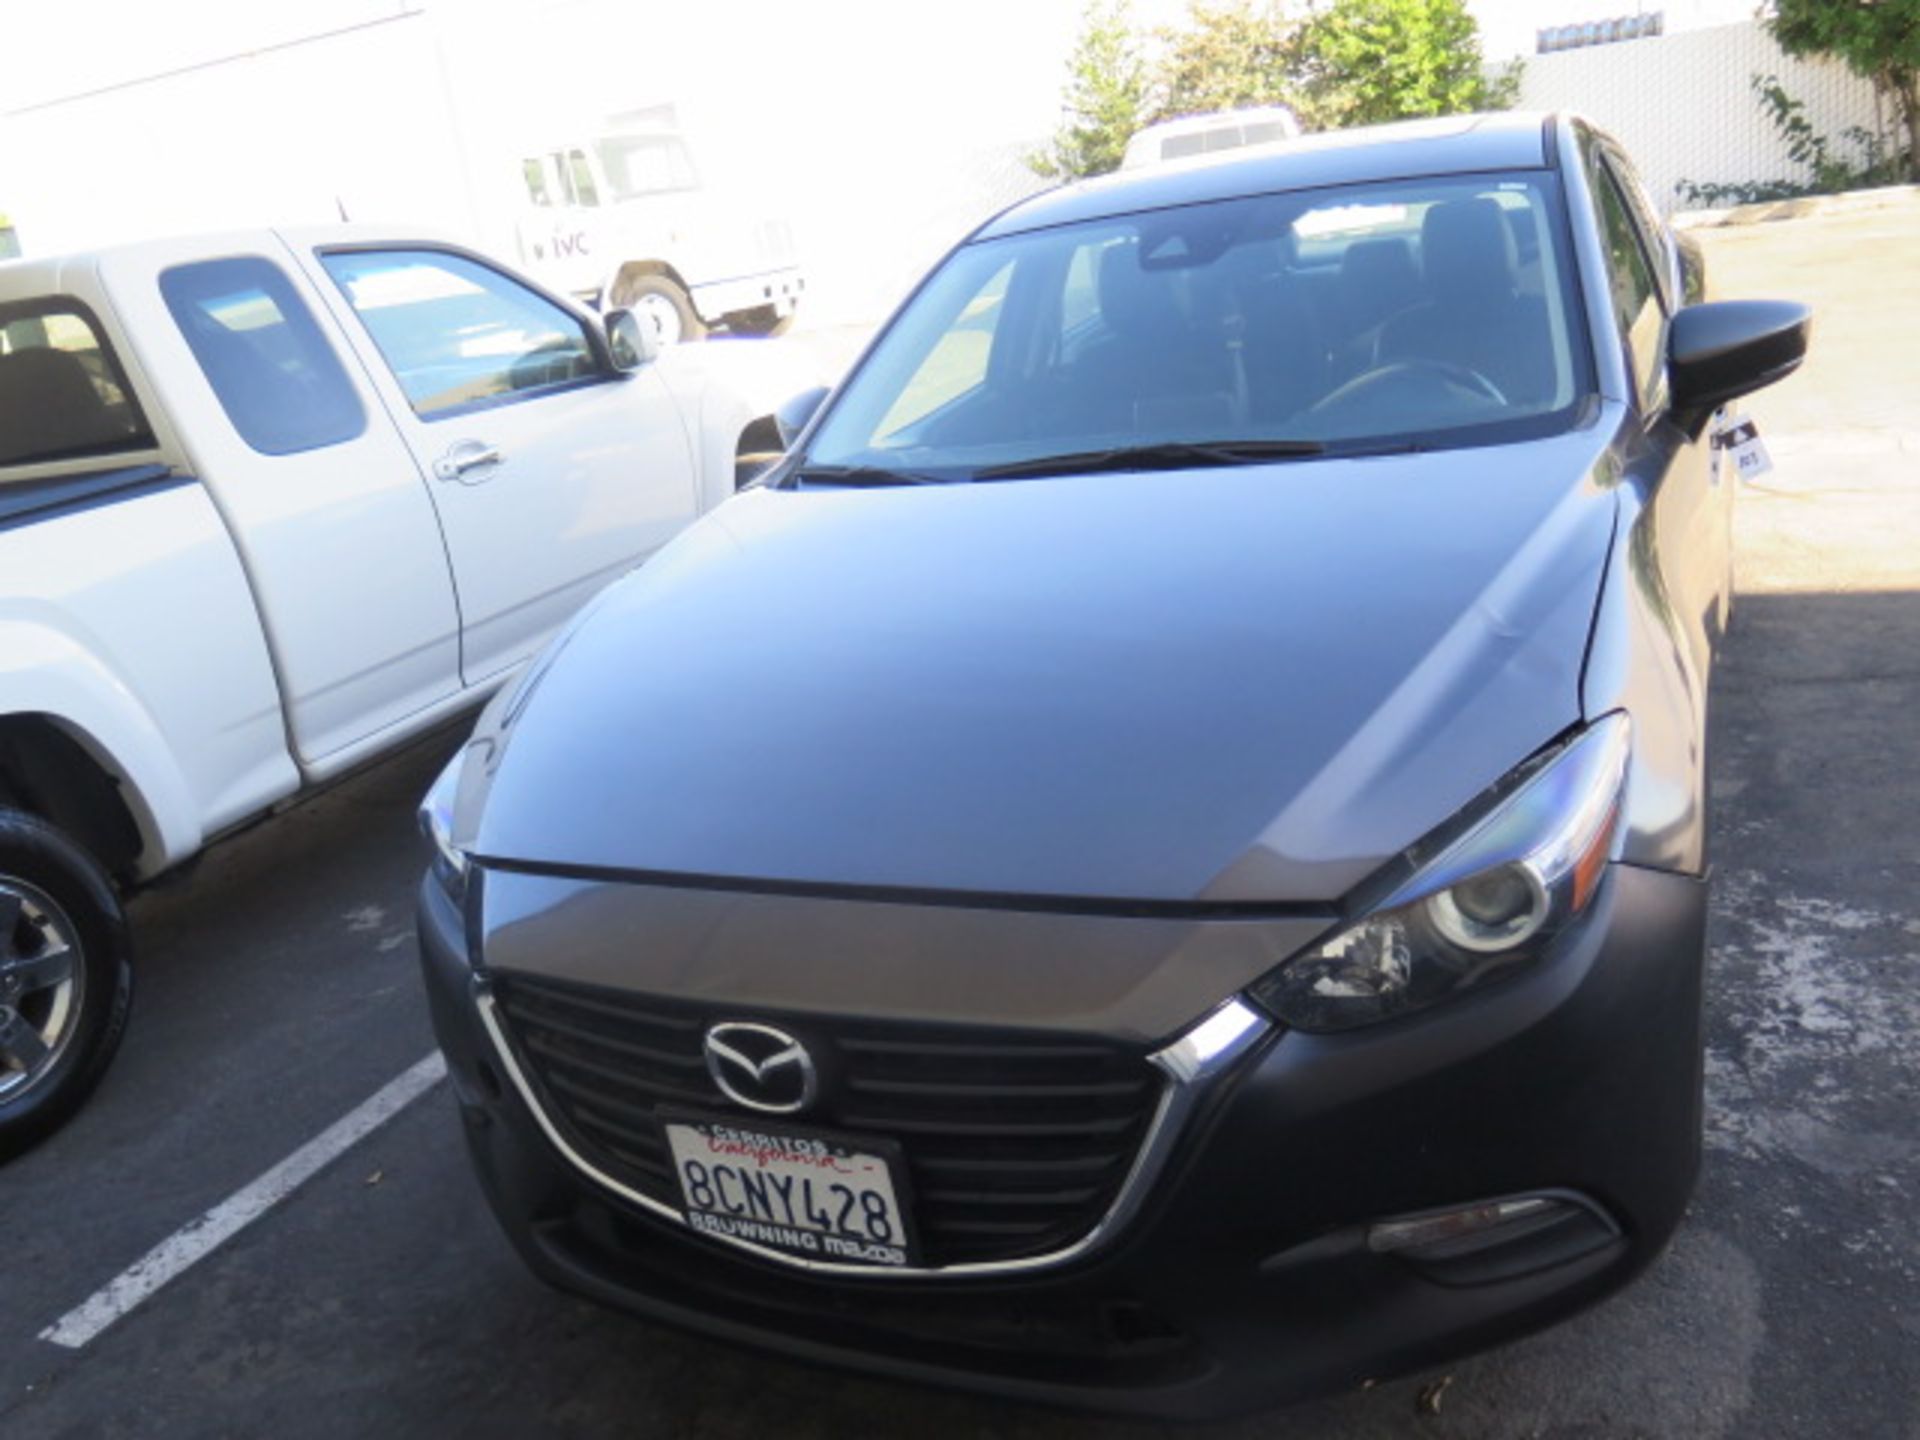 2018 Mazda 3 4-Door Sedan Lisc# 8CNY428 w/Gas Engine, Automatic Trans, Front End Damage, SOLD AS IS - Image 2 of 25